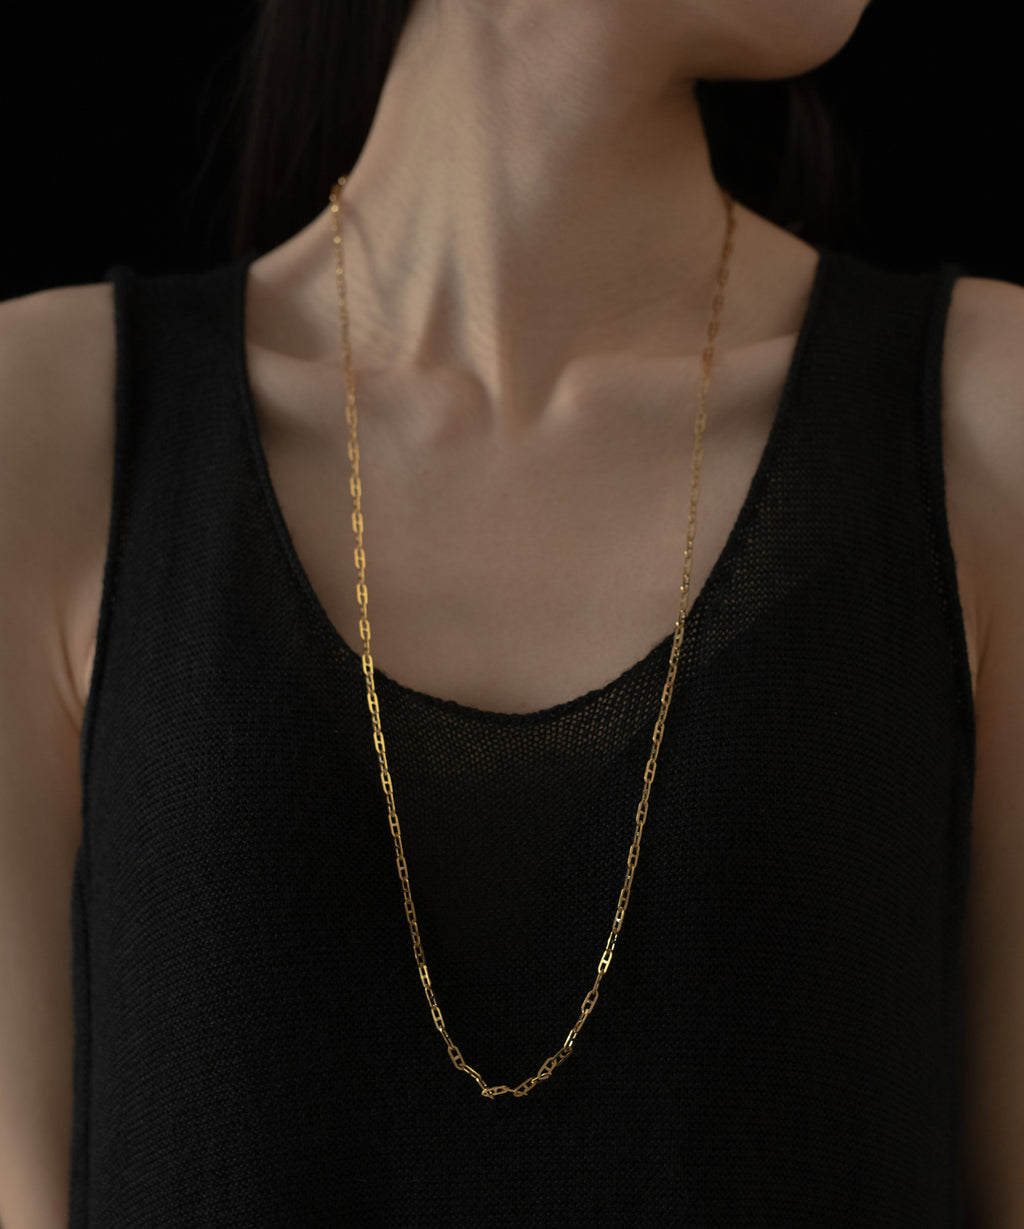 Oval Chain Long Necklace［Stainless］ | 大人のプチプラネックレス